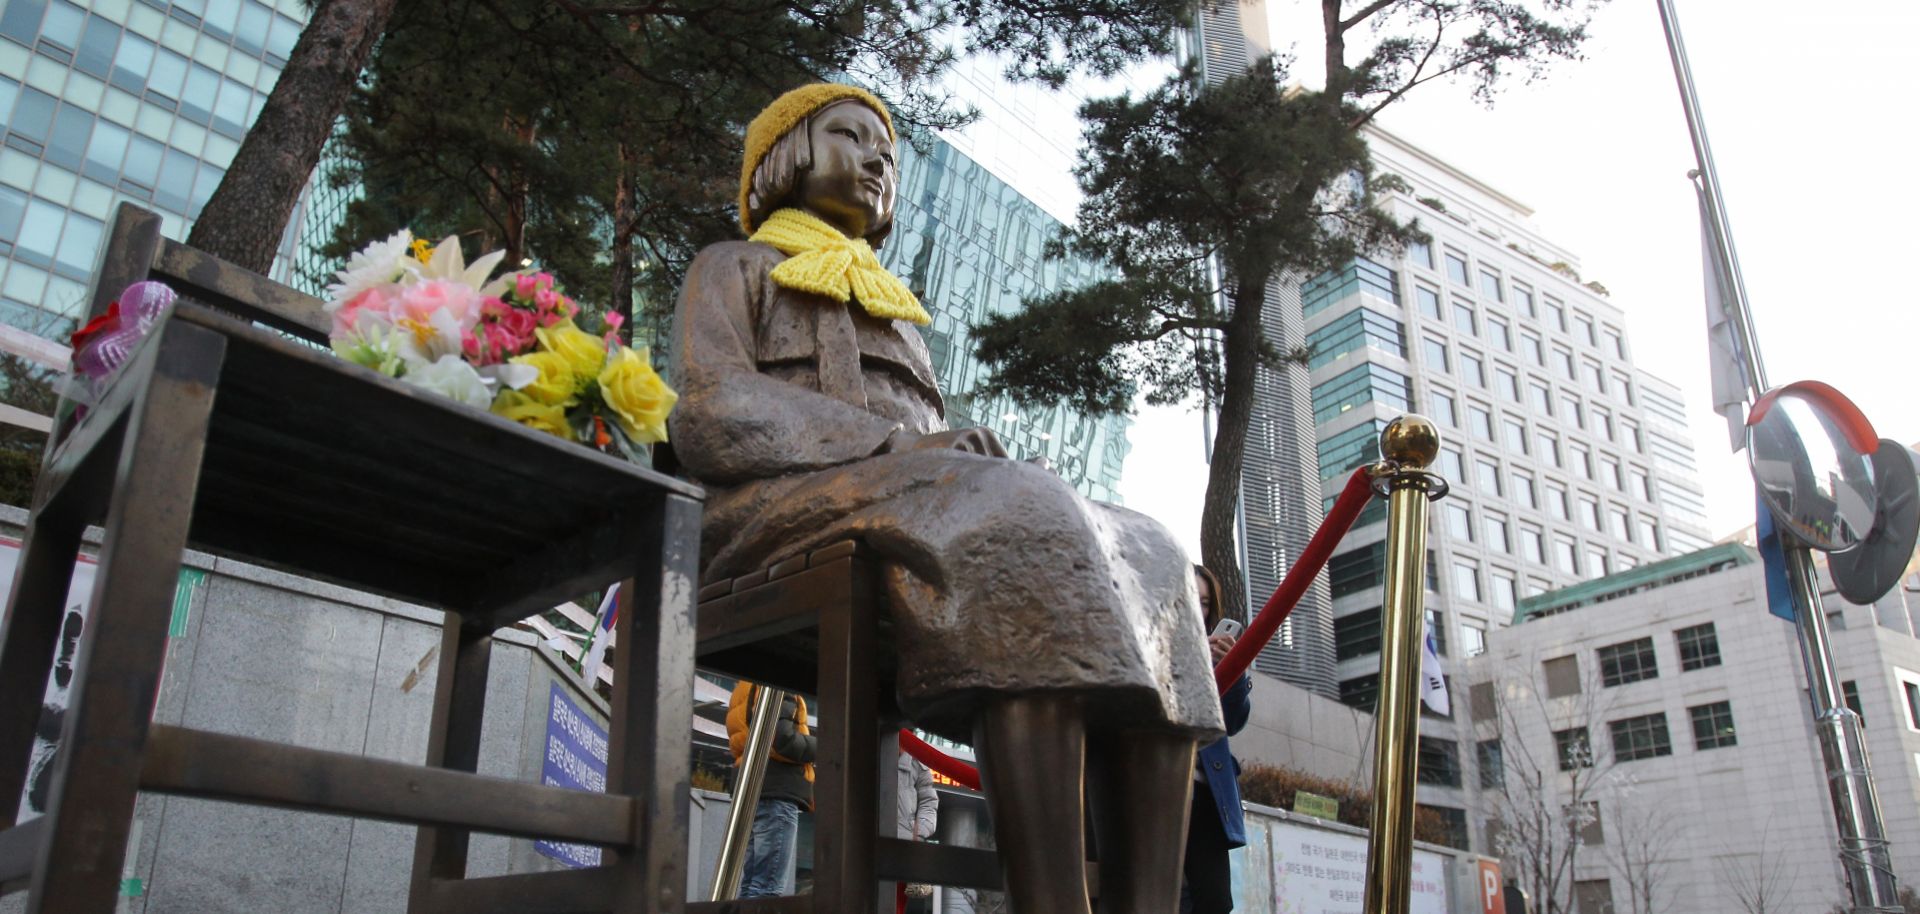 A statue of a girl that commemorates the World War II-era issue of "comfort women" stands outside the Japanese Embassy in Seoul.